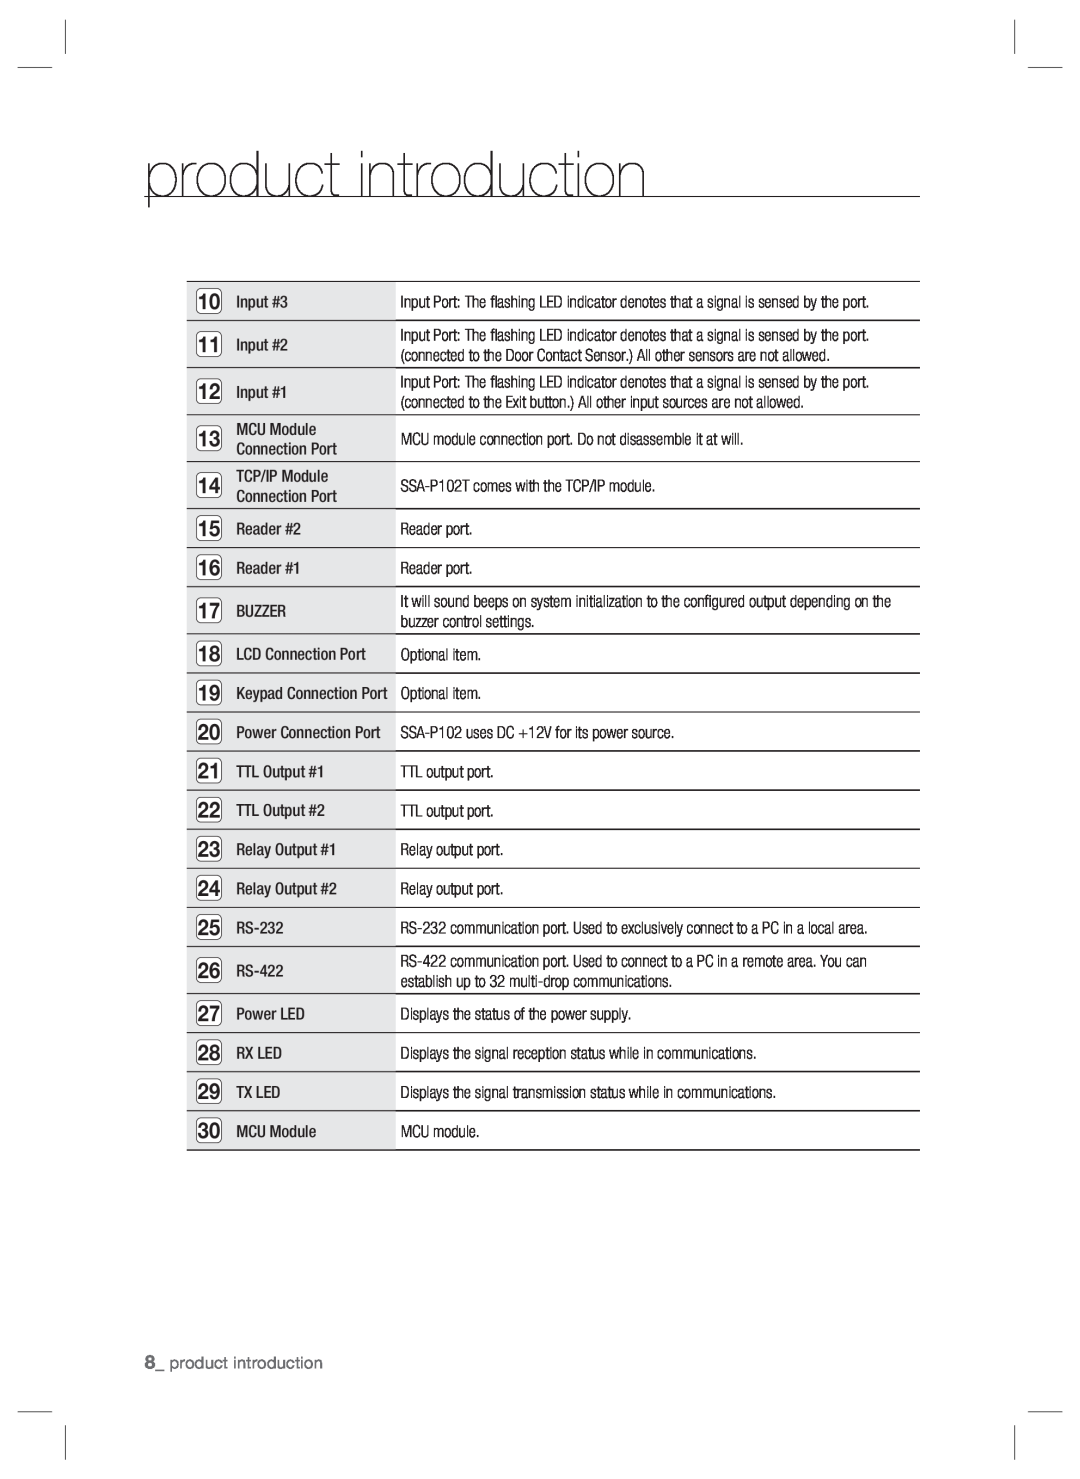 Samsung SSA-P102T user manual product introduction, Input #3 